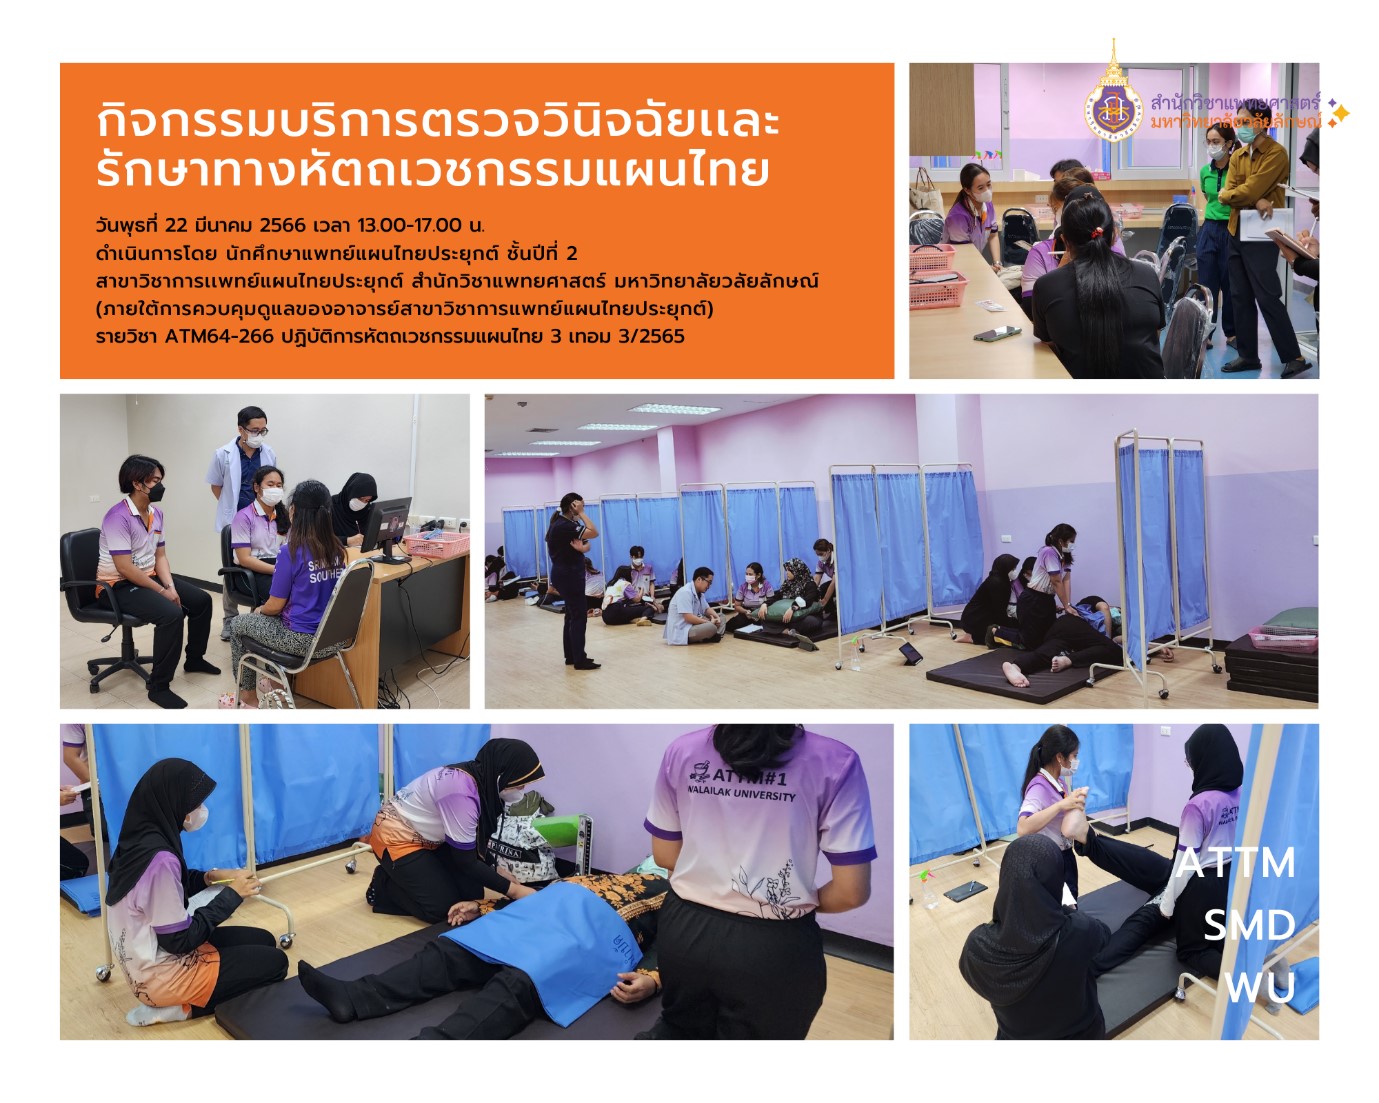 Thai Traditional Medicine Diagnostic and Treatment Services